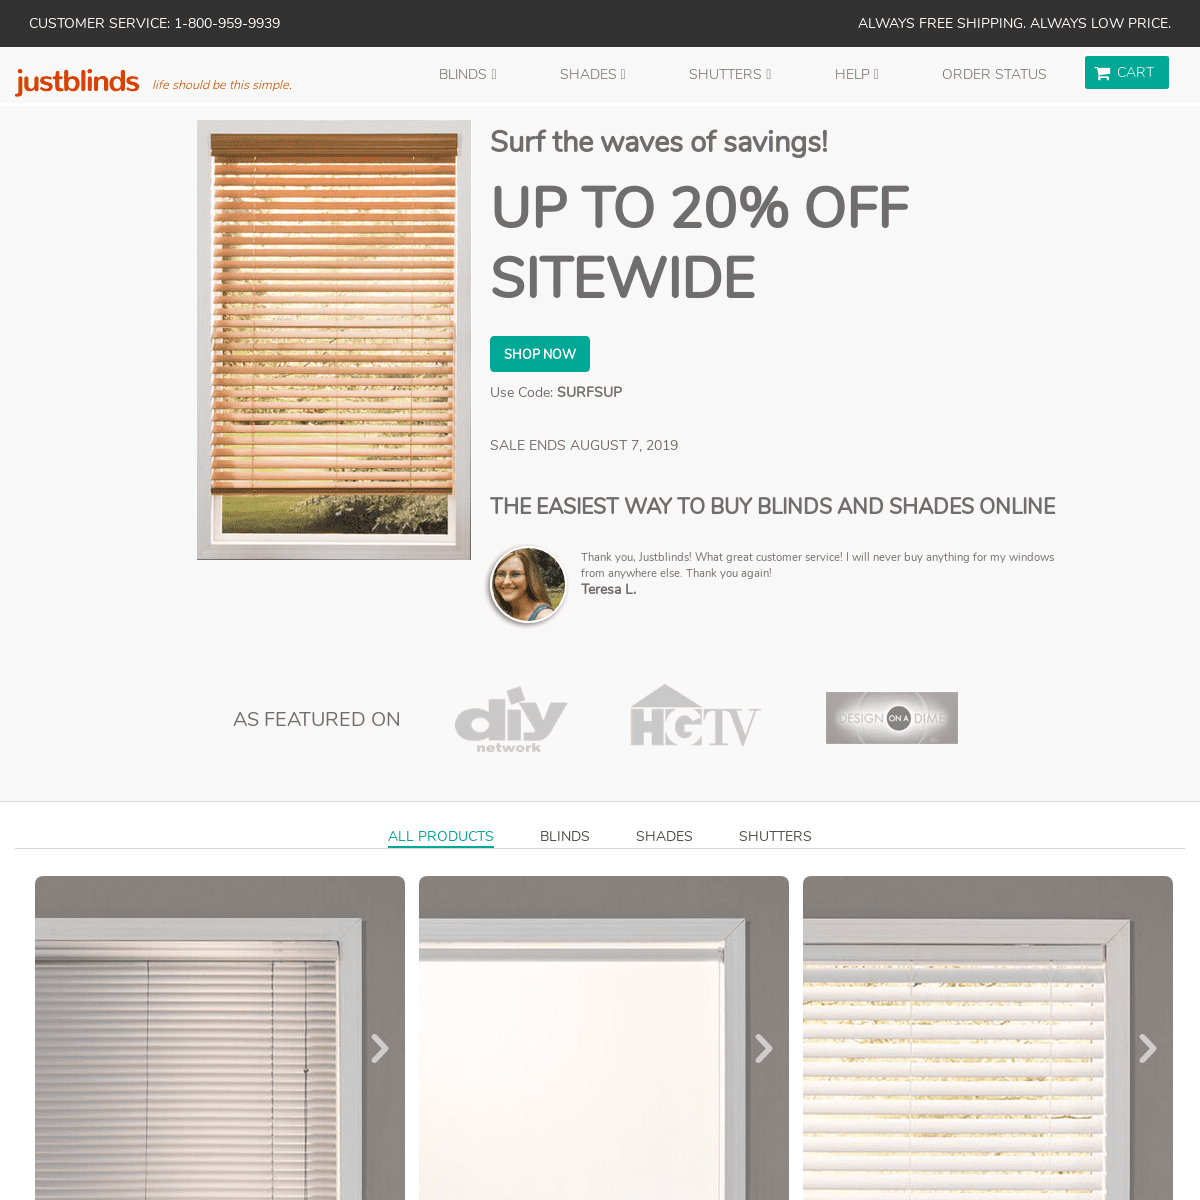 Blinds & Window Shades - Everyday Lowest Prices | justblinds